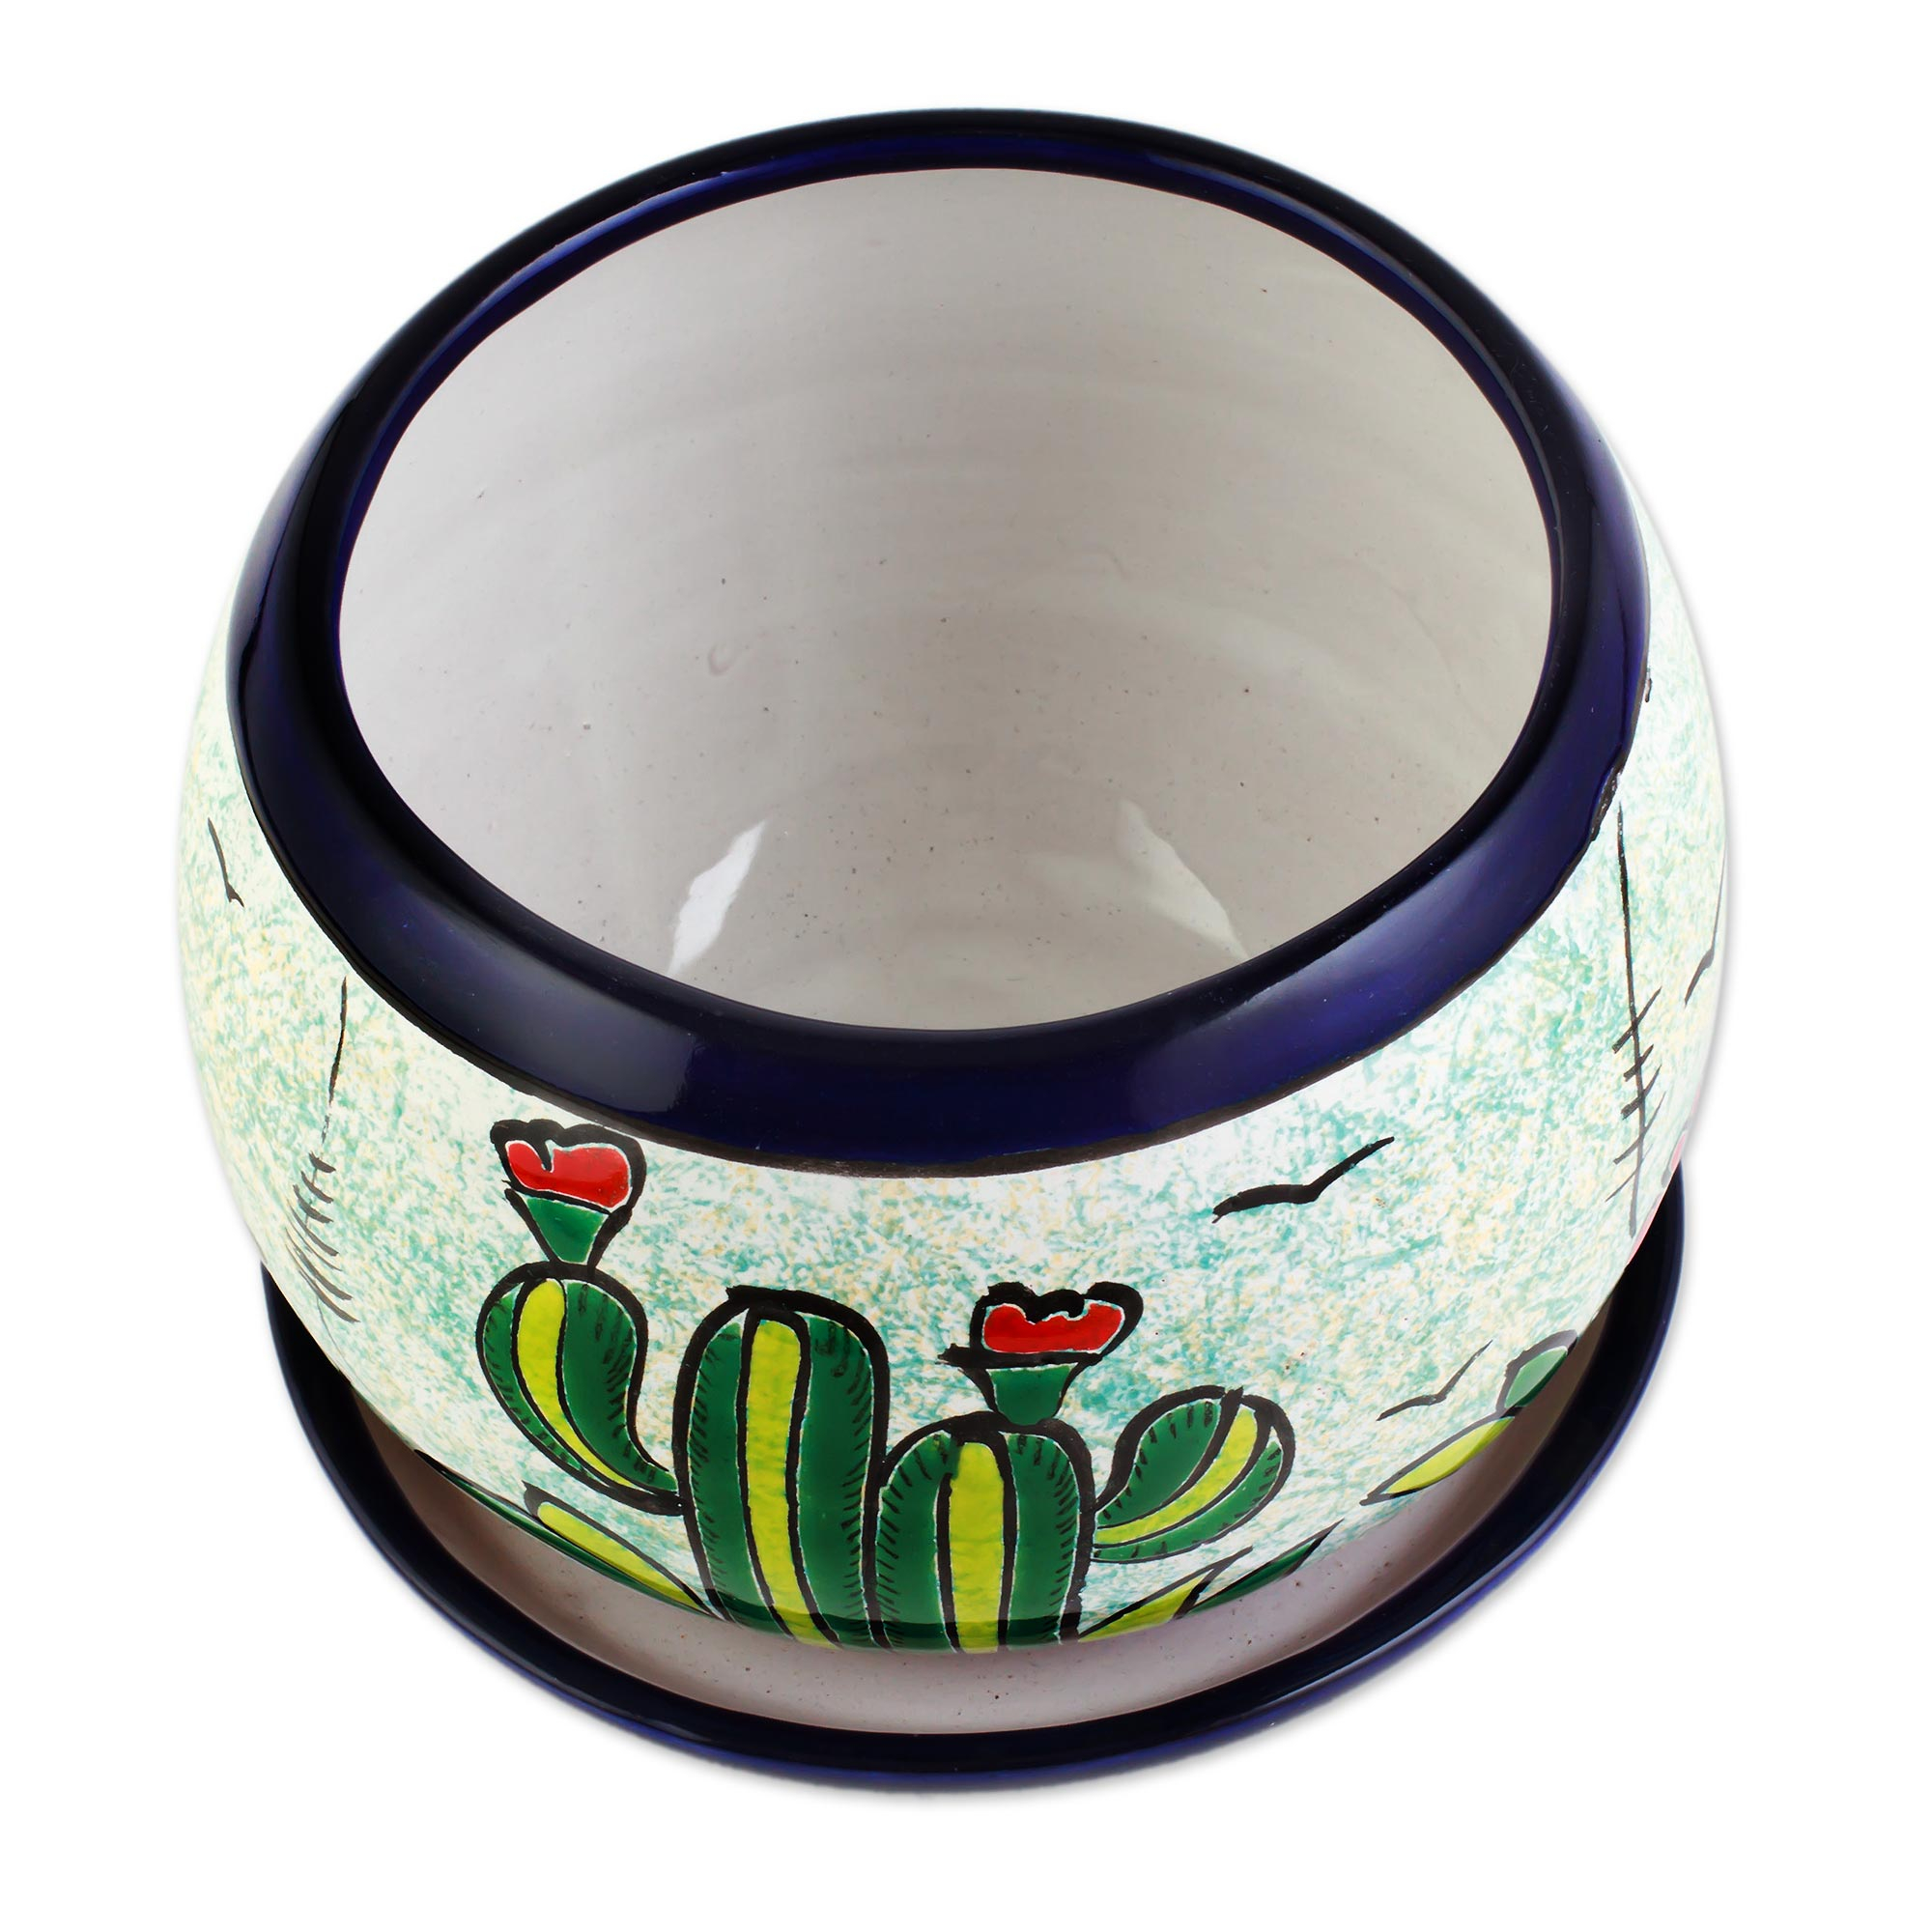 Handcrafted Ceramic Flower Pot with Cactus Images - Mexican Memories ...